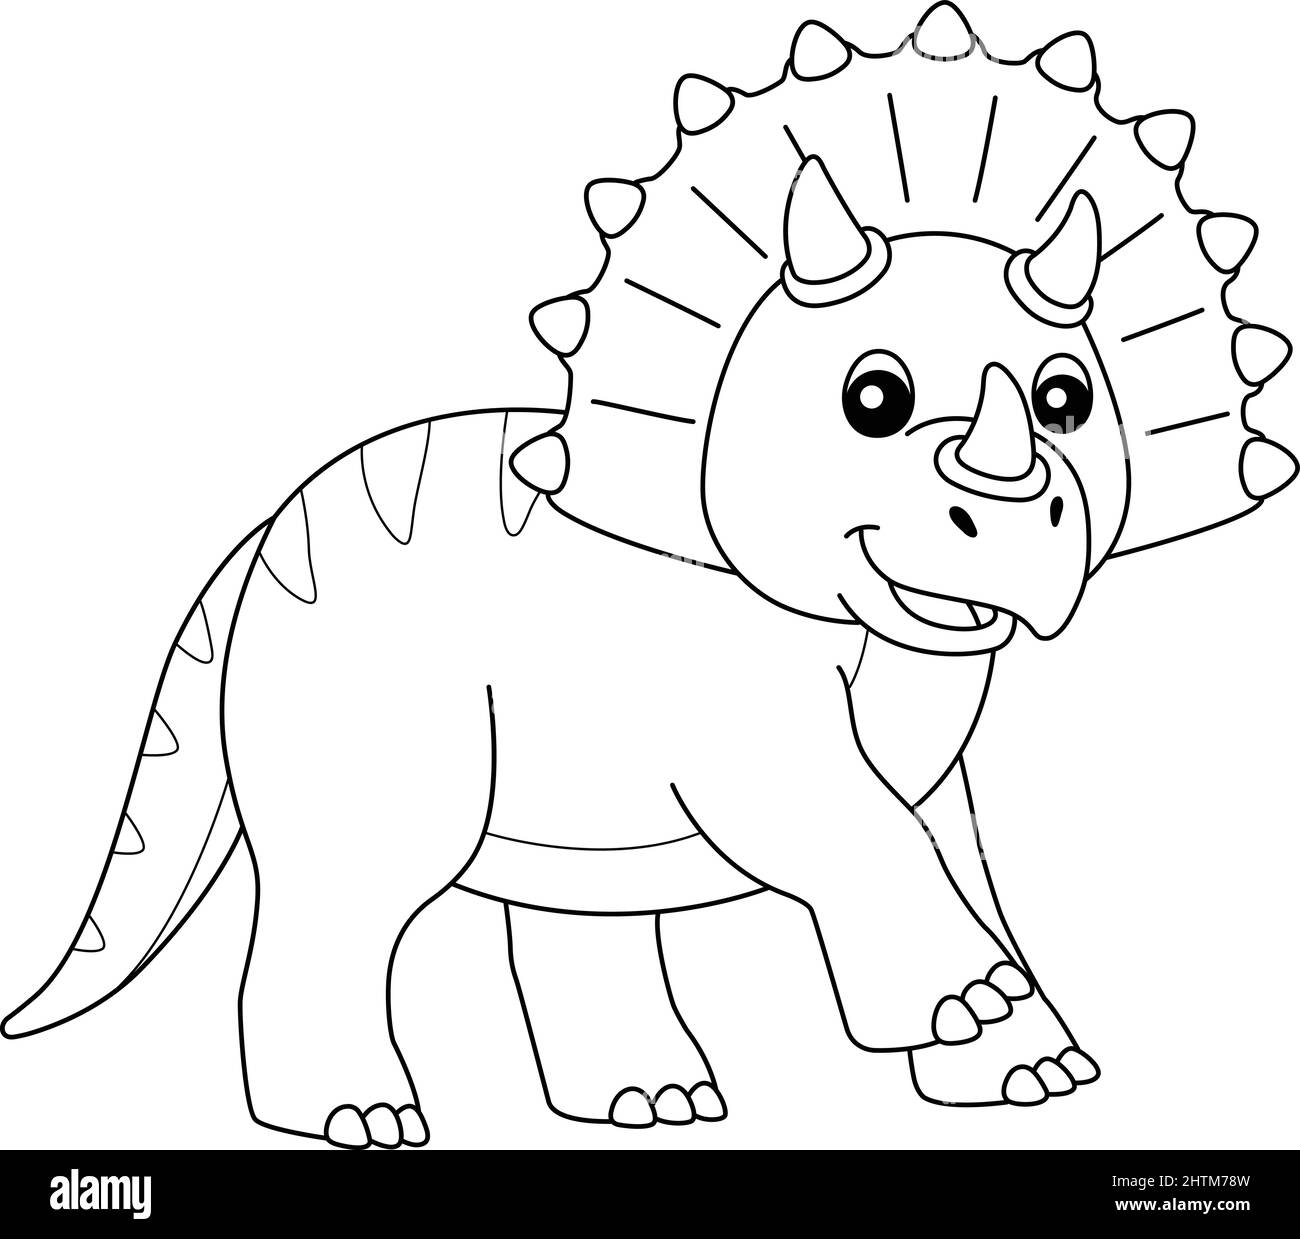 Triceratops coloring isolated page for kids stock vector image art